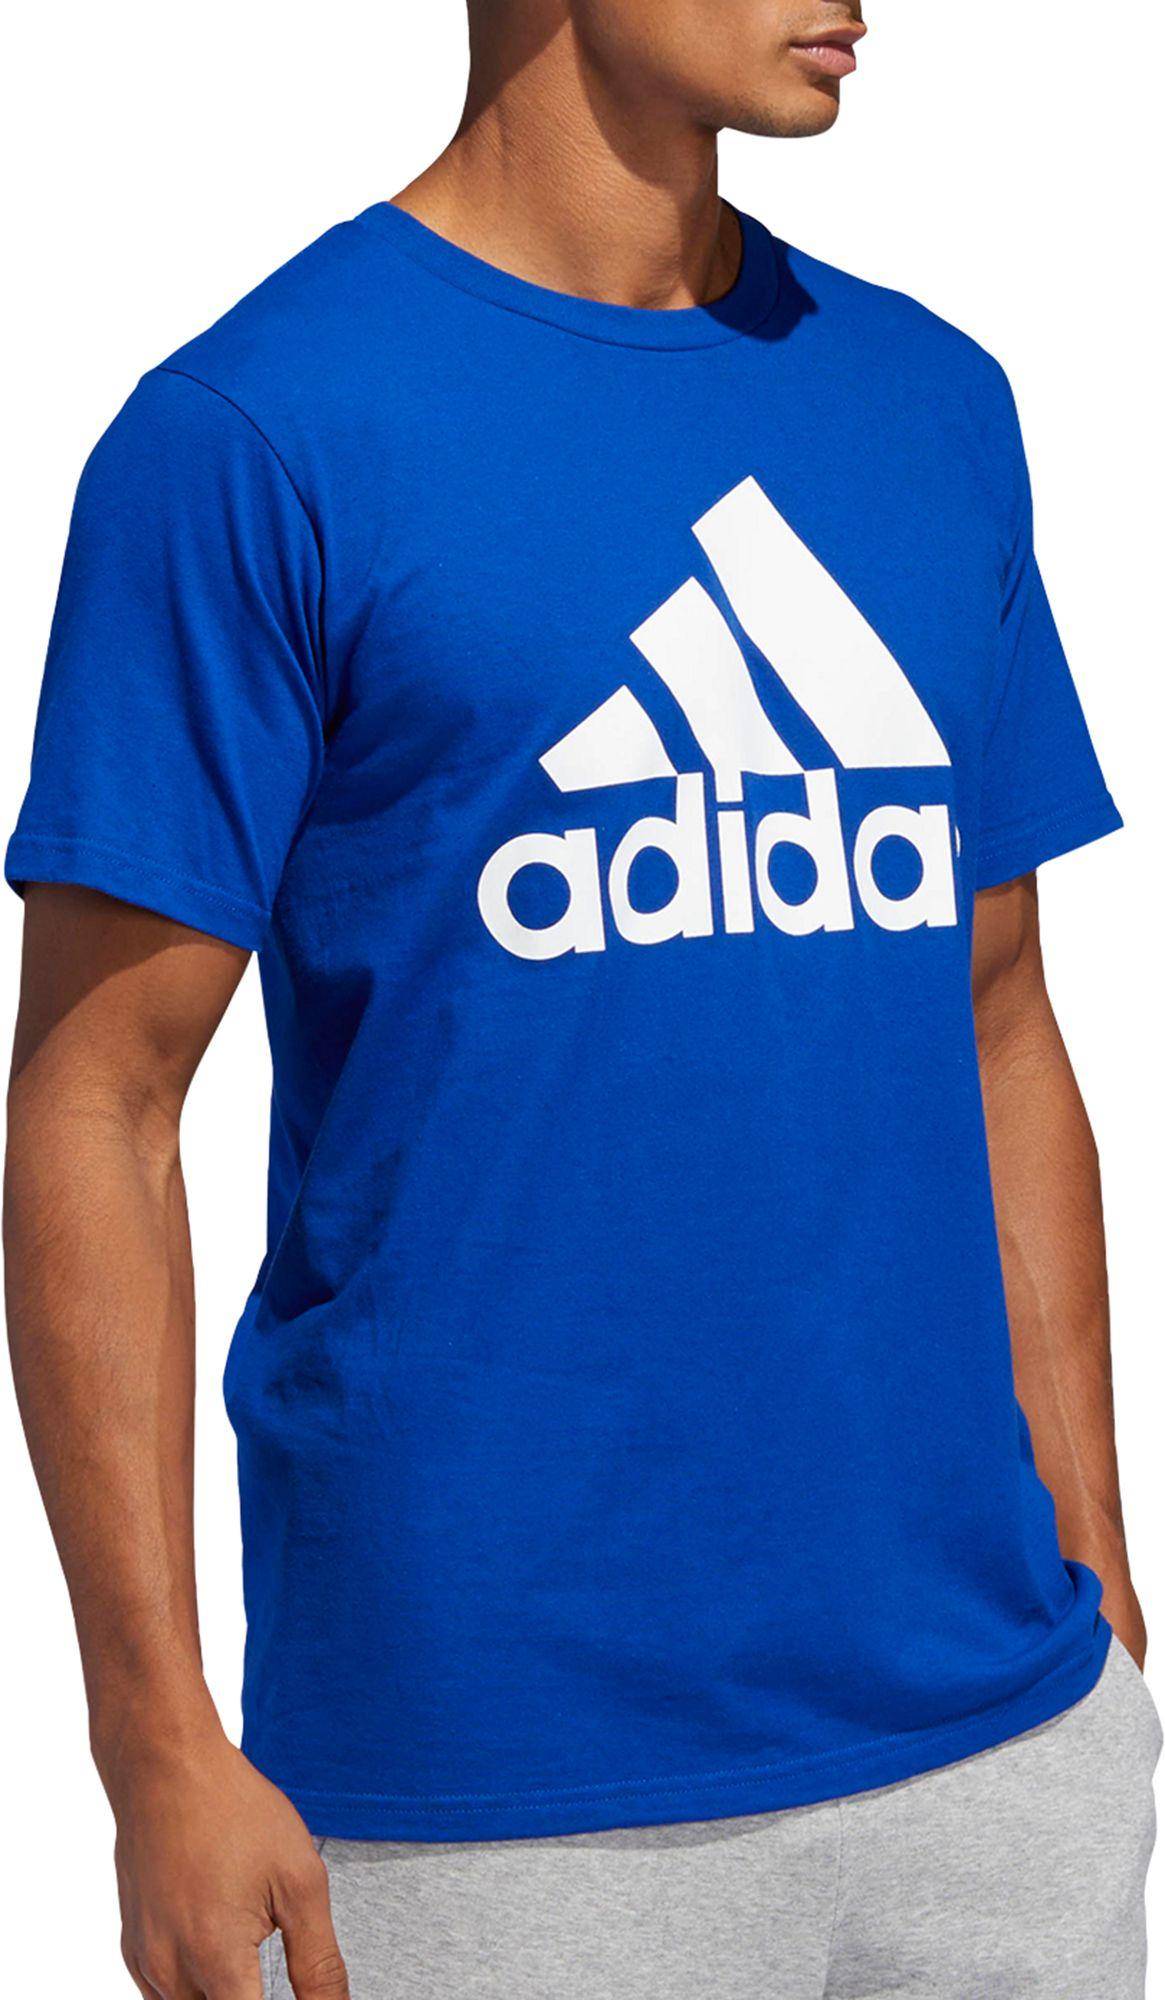 adidas Synthetic Adge Of Sport Classic T-shirt in Blue for Men - Lyst